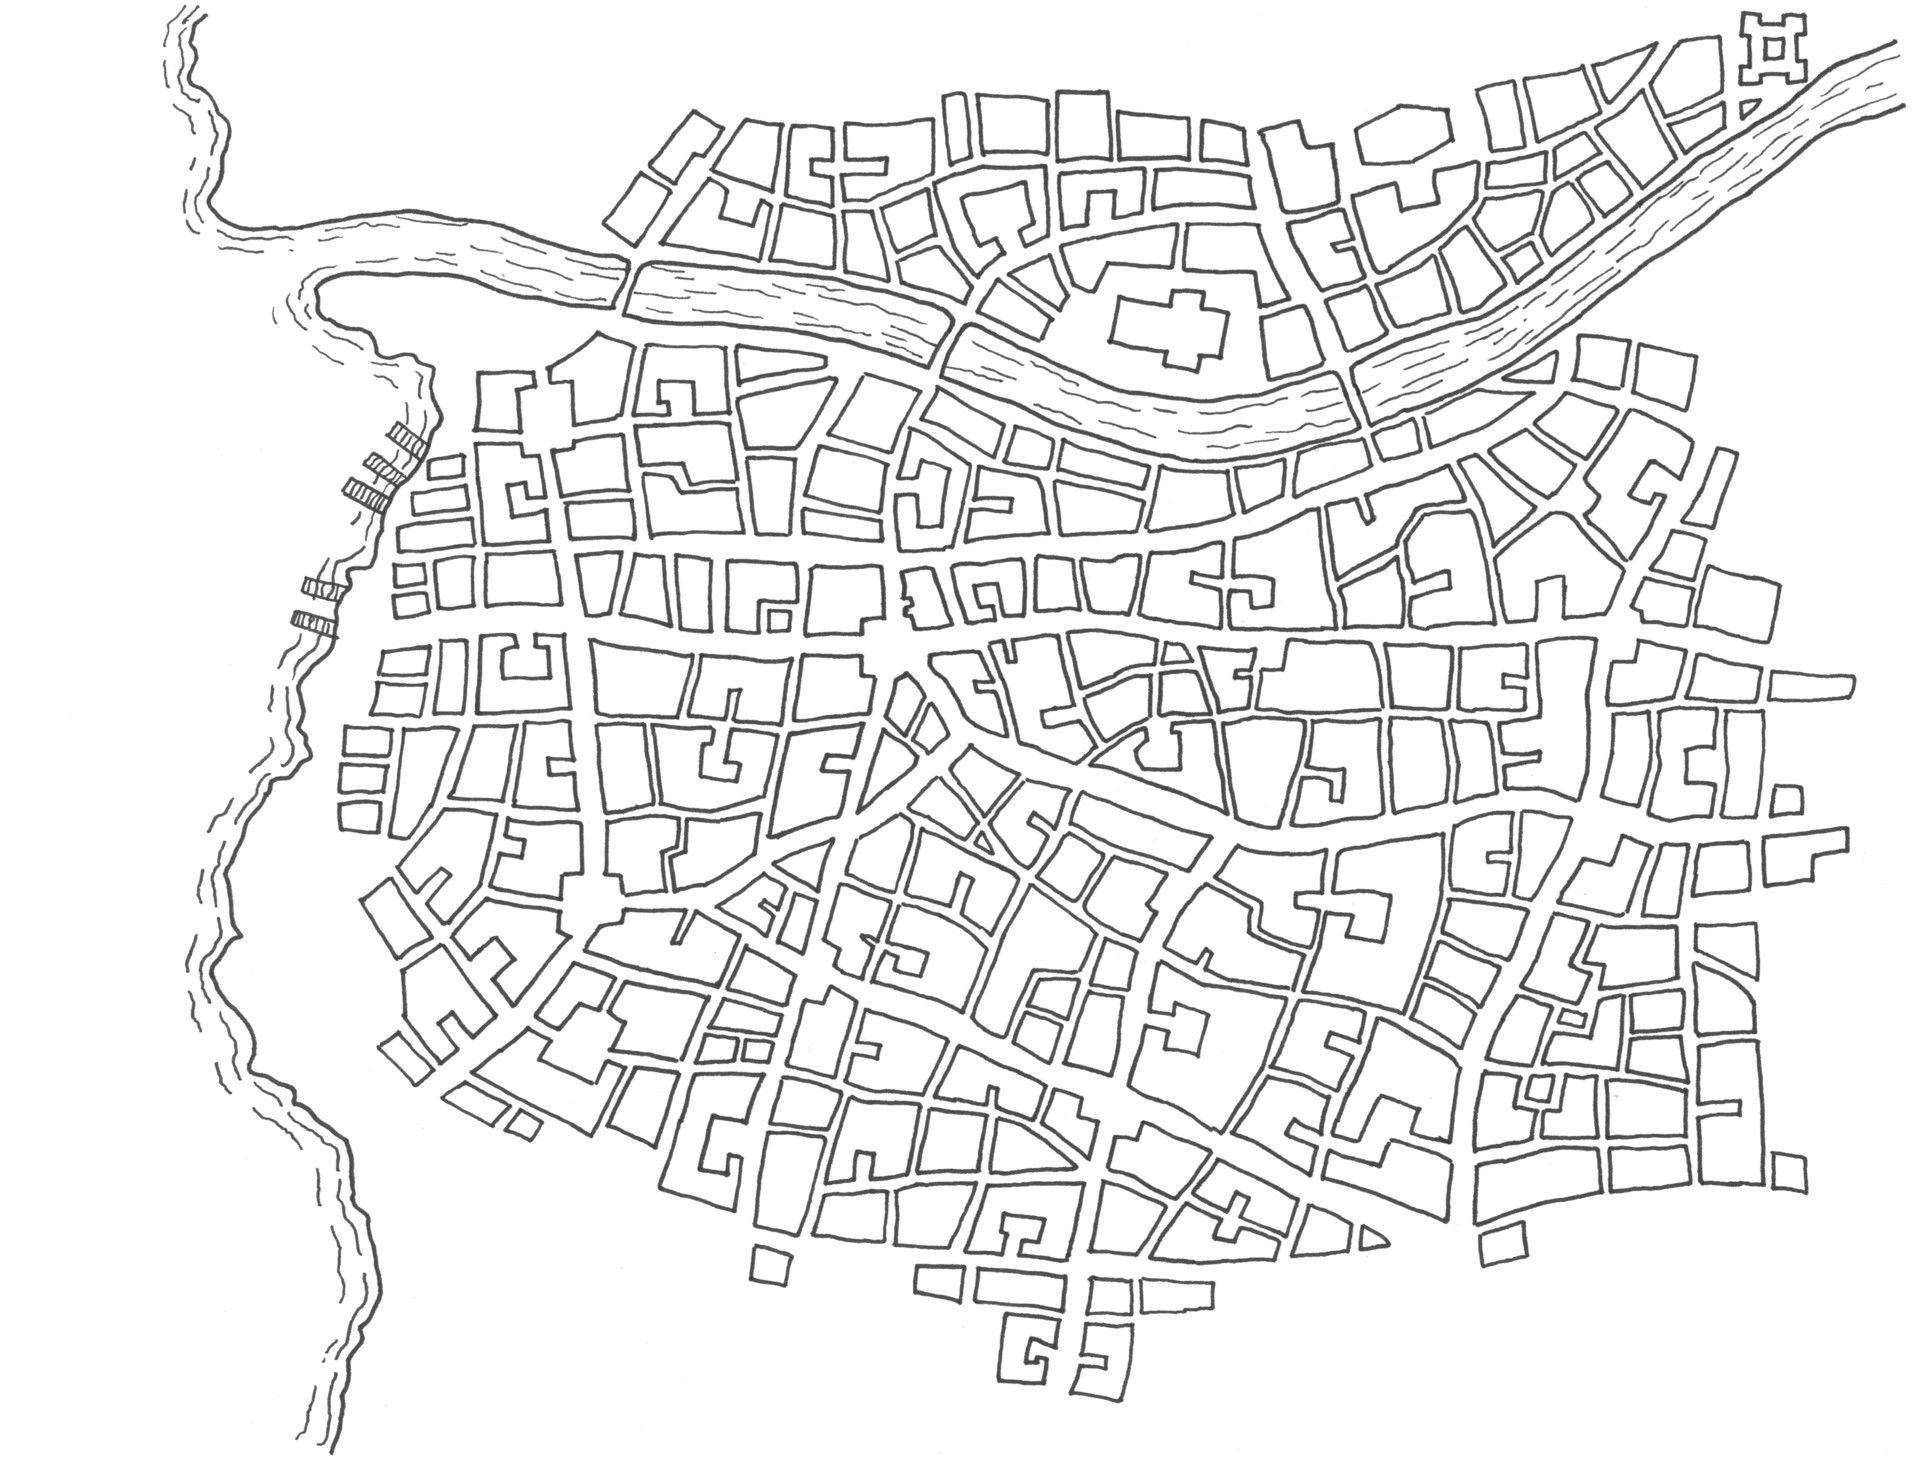 How to Draw a City Map